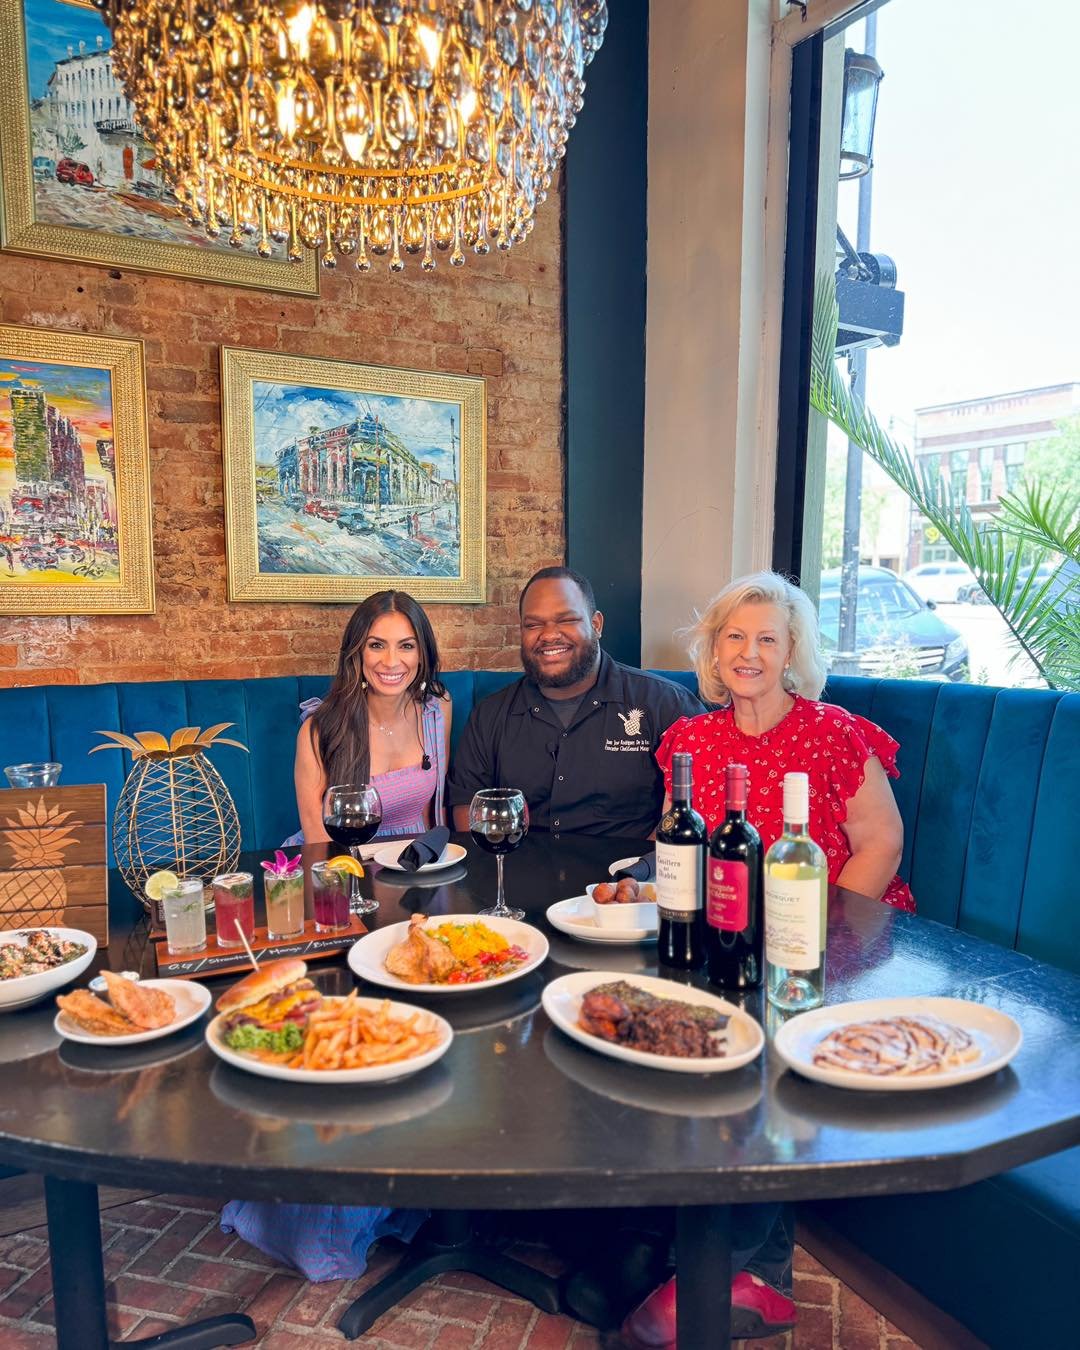 Exciting news! 🎉 We had a blast filming with Ana Christina for Local Living. Our GM and executive chef Juan Jose and FOH manager Miss Hope enjoyed showcasing Pineapple Ink's delicious dishes. Tune in on May 18 to catch the segment and get a taste of